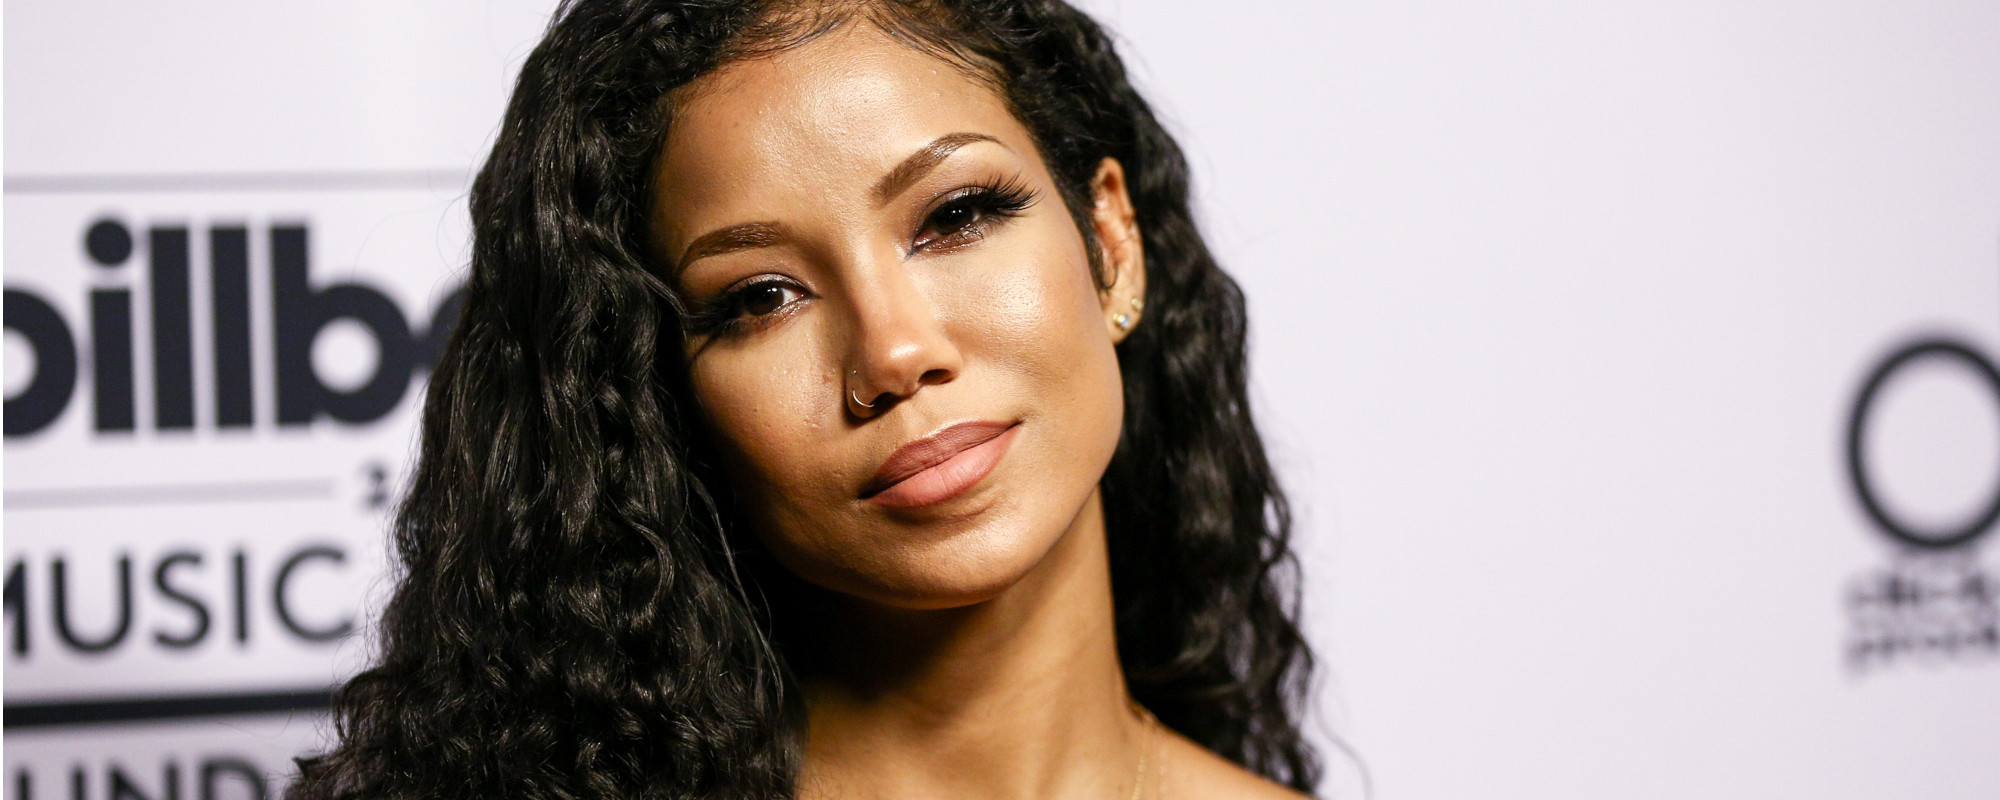 Ex-NFL Star Gets Full Arm Tattoo of Jhené Aiko’s Name Despite Never Meeting Her: “That’s My Spiritual Wife”